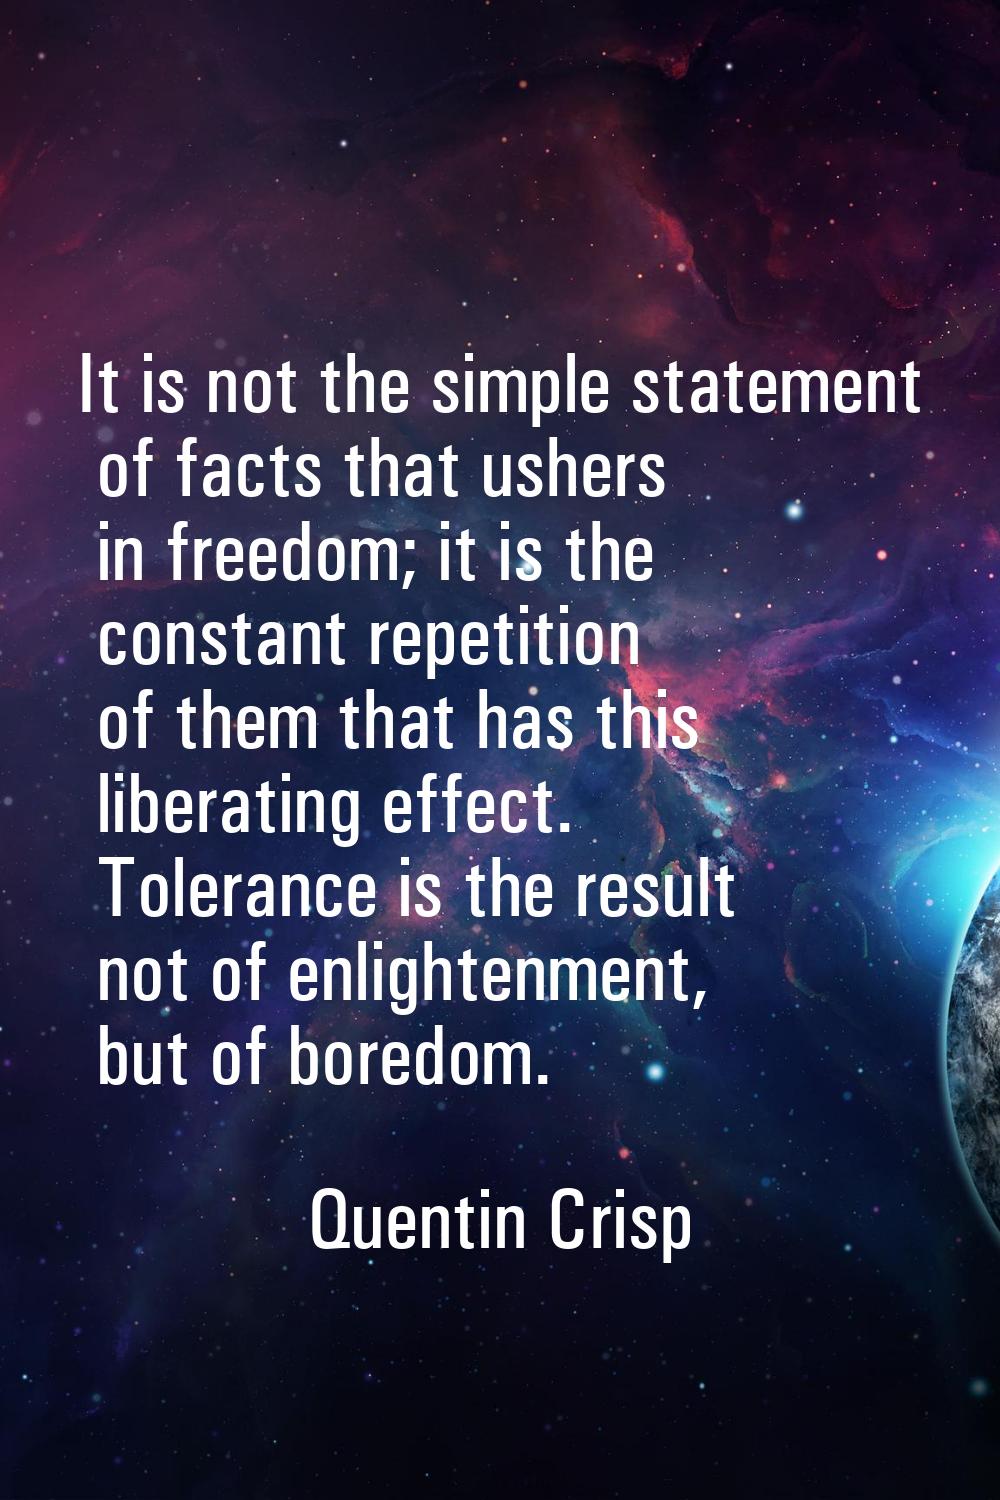 It is not the simple statement of facts that ushers in freedom; it is the constant repetition of th